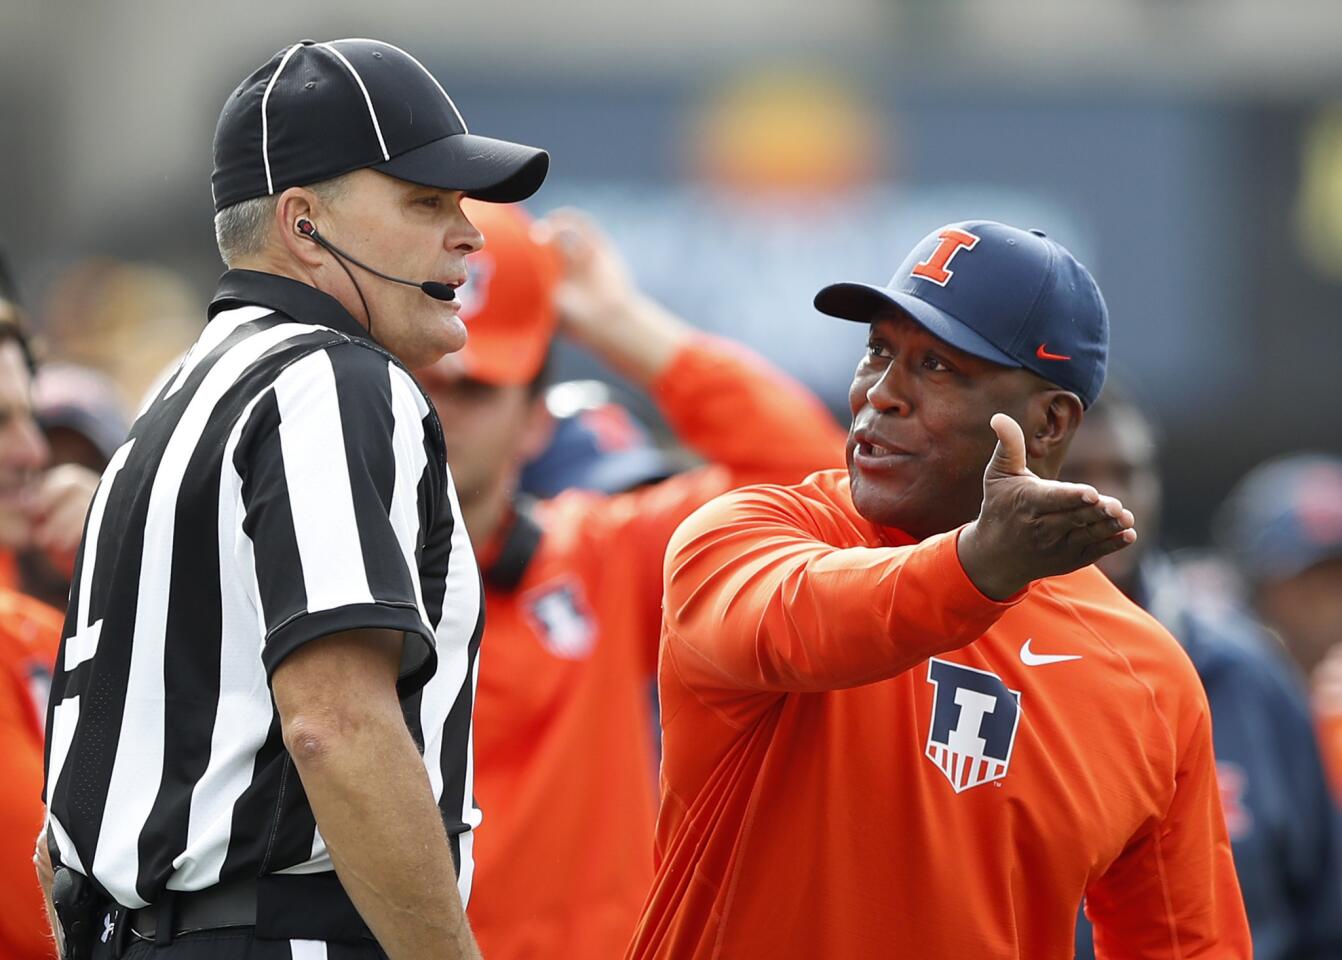 Illinois coach Lovie Smith, right, questions a call against his team during the first half against Iowa, Saturday, Oct. 7, 2017, in Iowa City, Iowa.